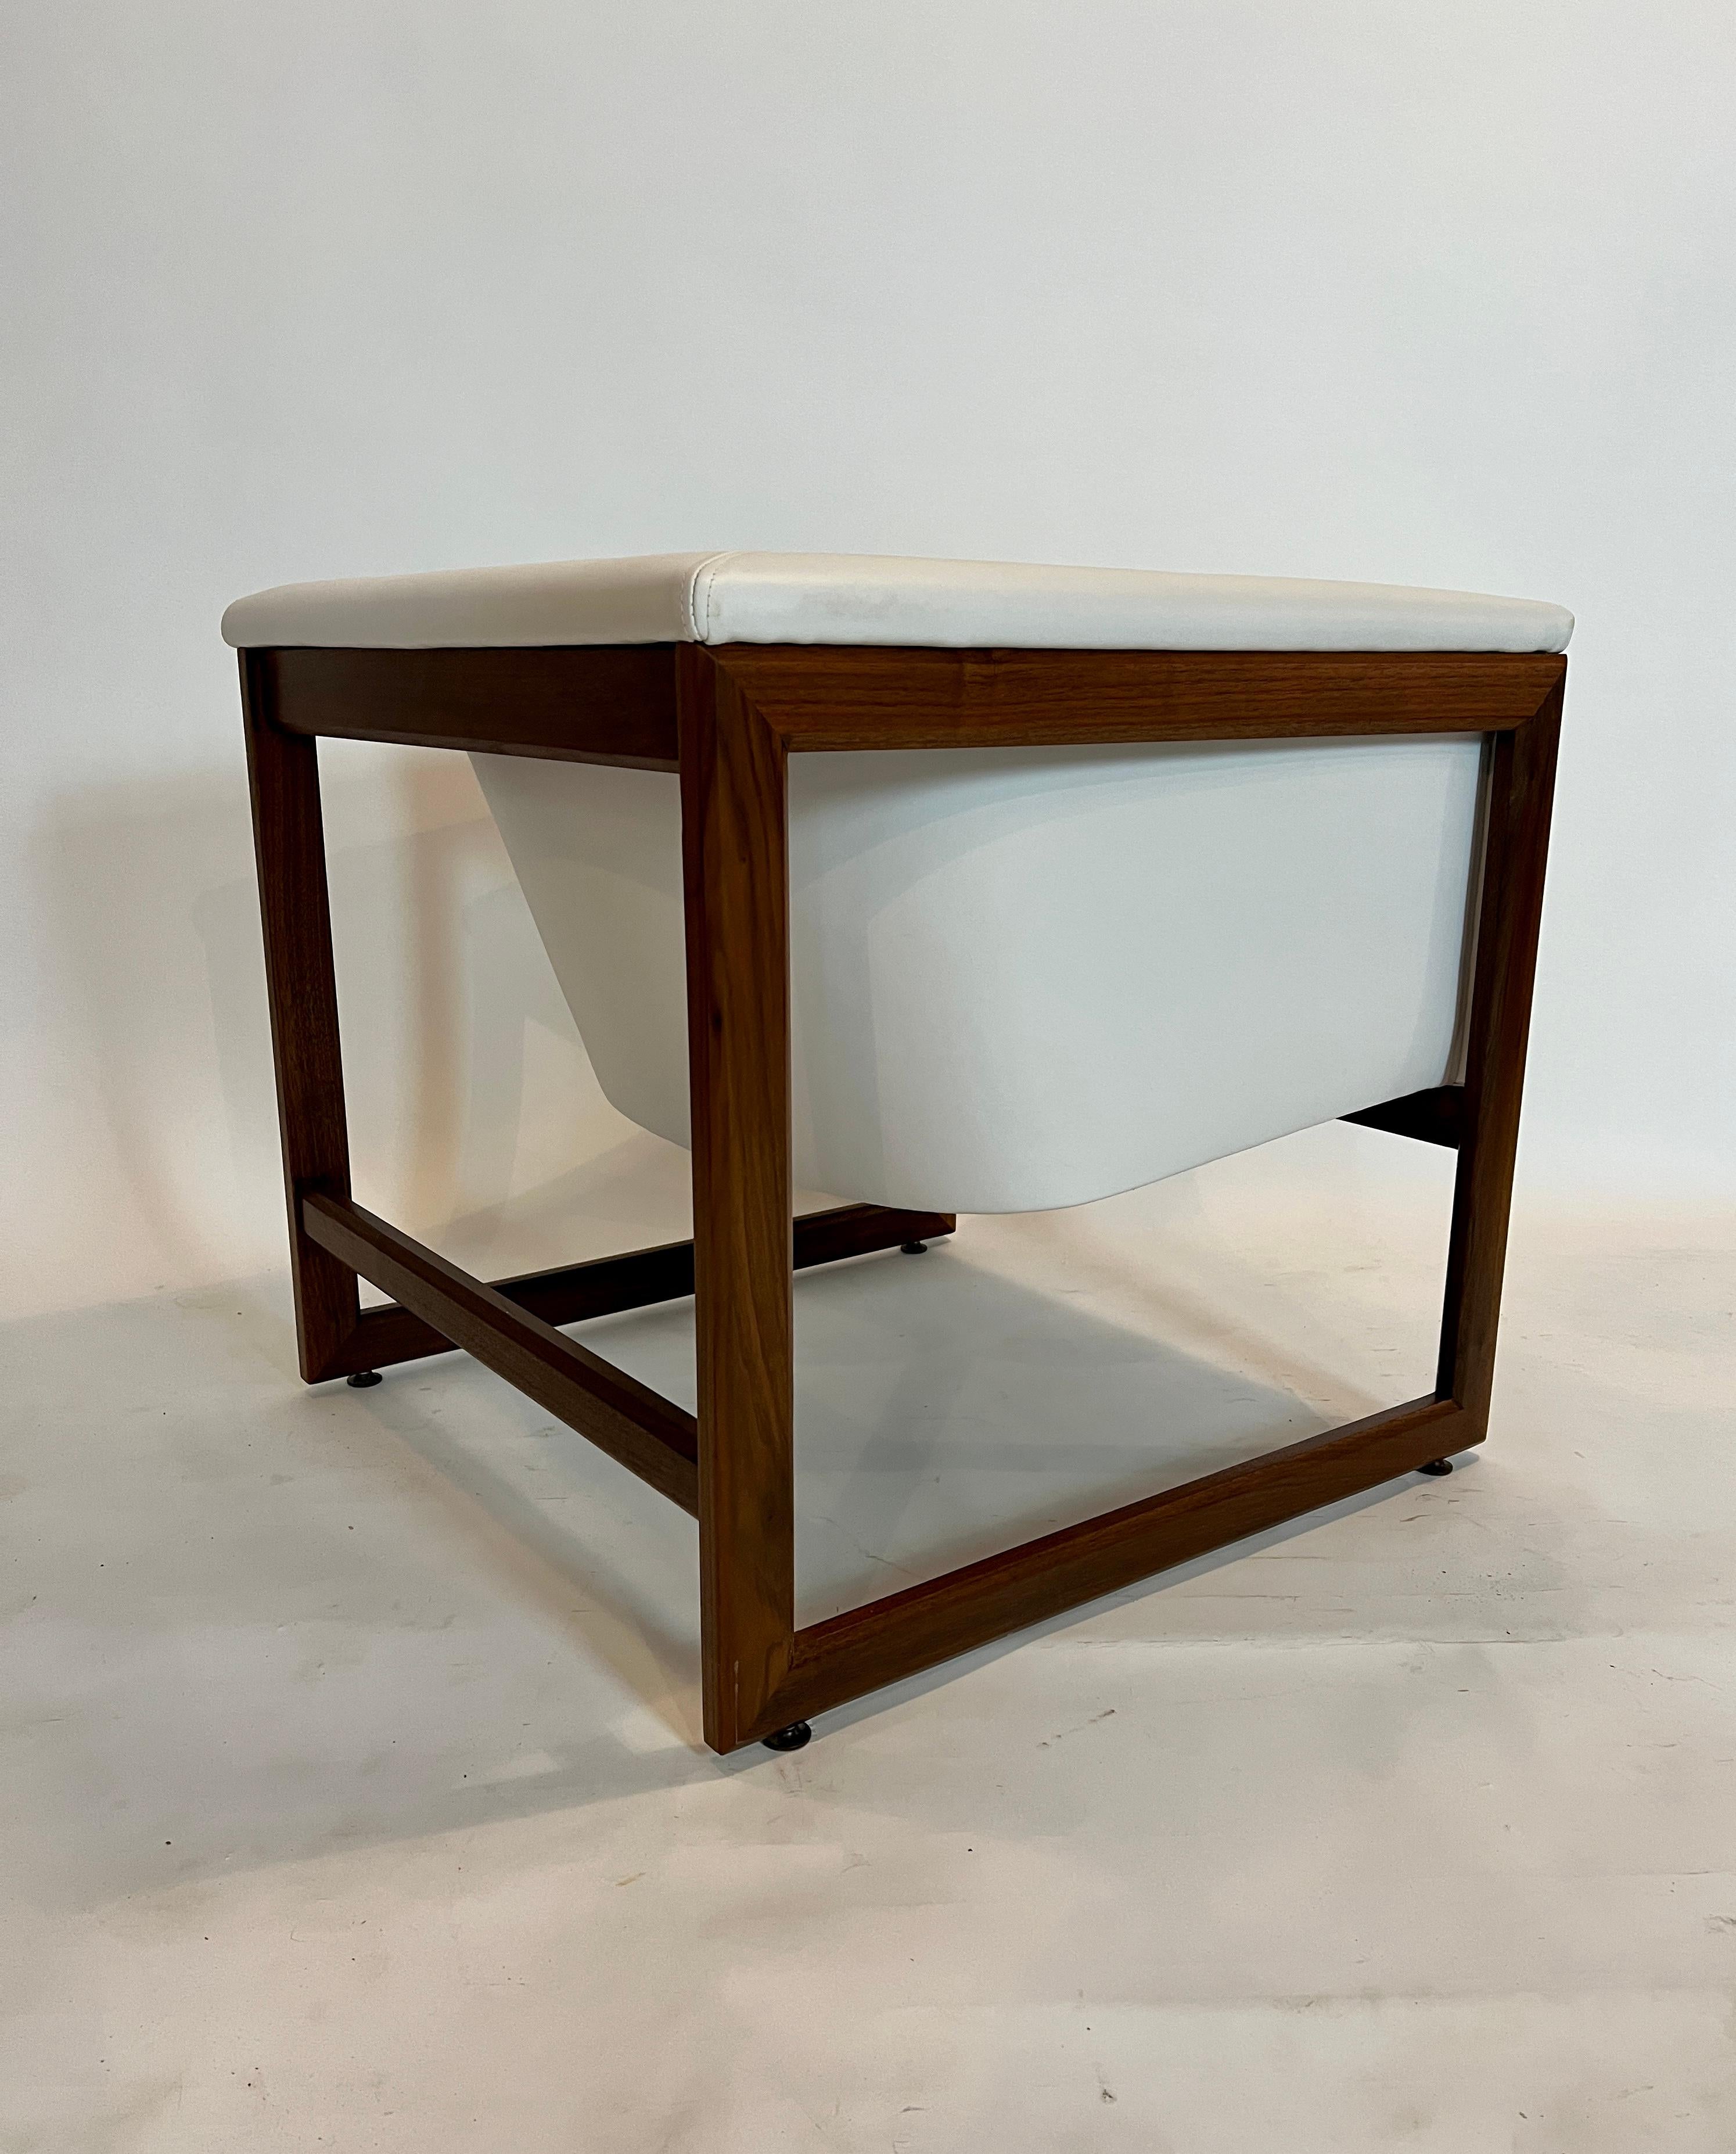 Milo Baughman Cube Chair In Excellent Condition For Sale In Chicago, IL